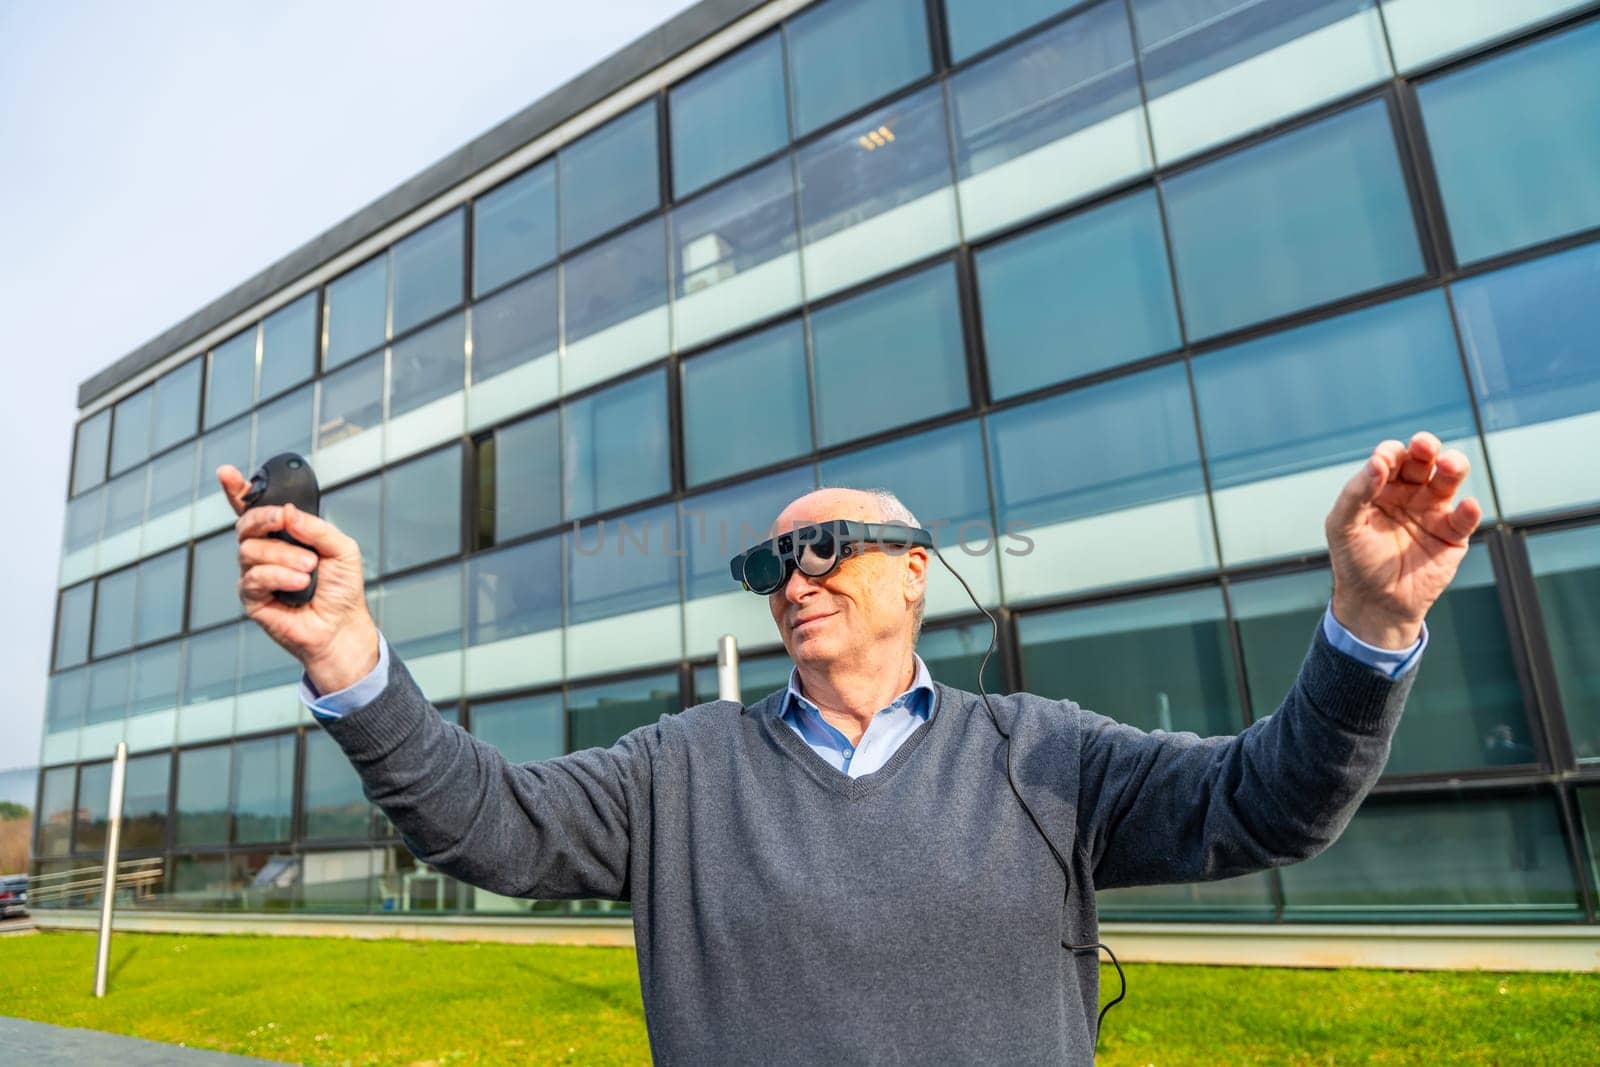 Aged man using augmented mixed vision headset and gesturing by Huizi